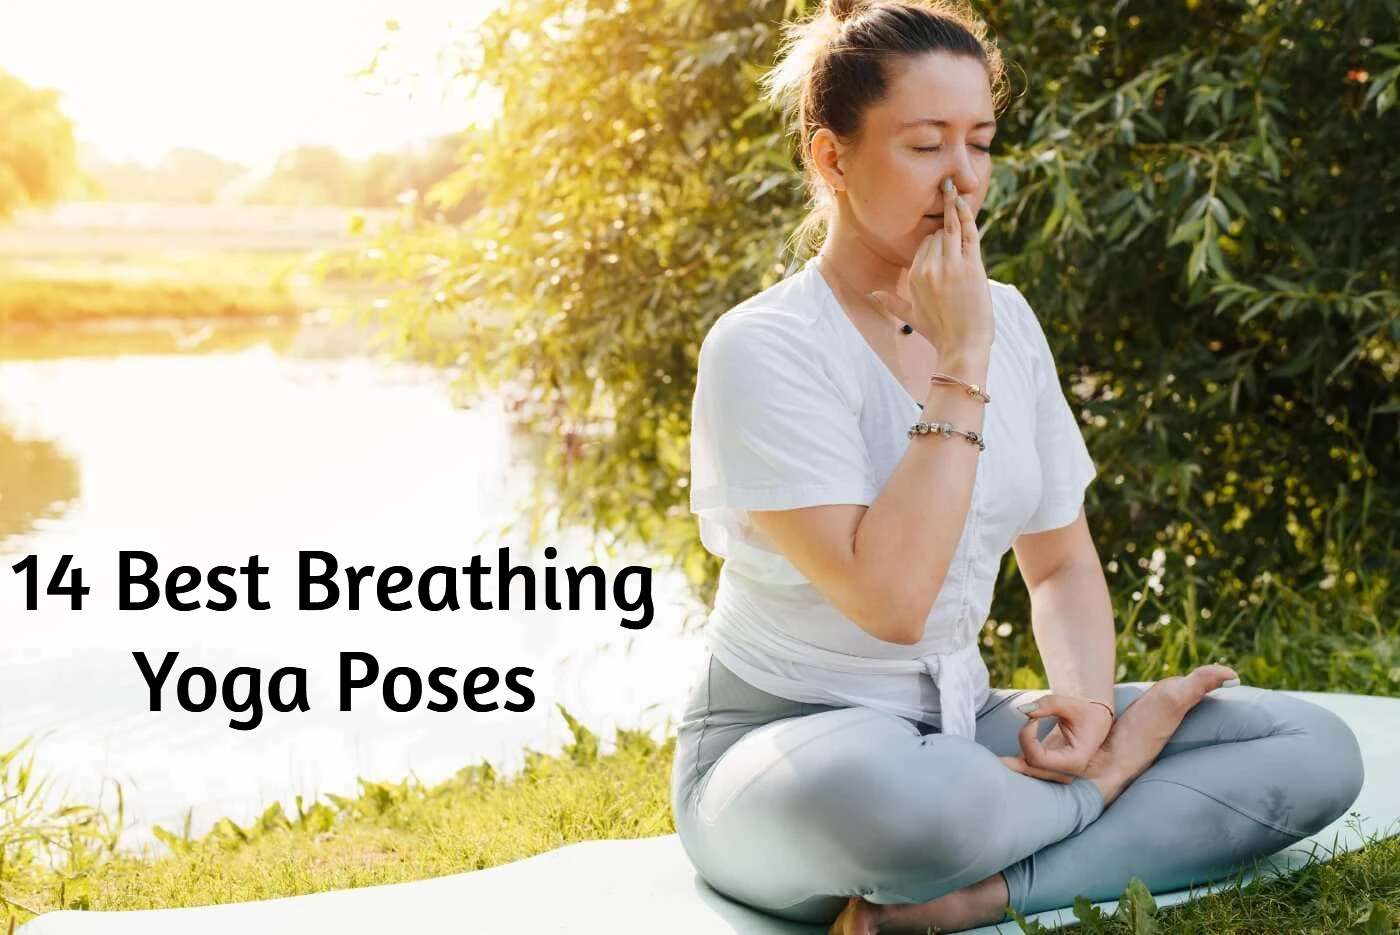 14 Best Breathing Yoga Poses - For Inner Peace and Vitality